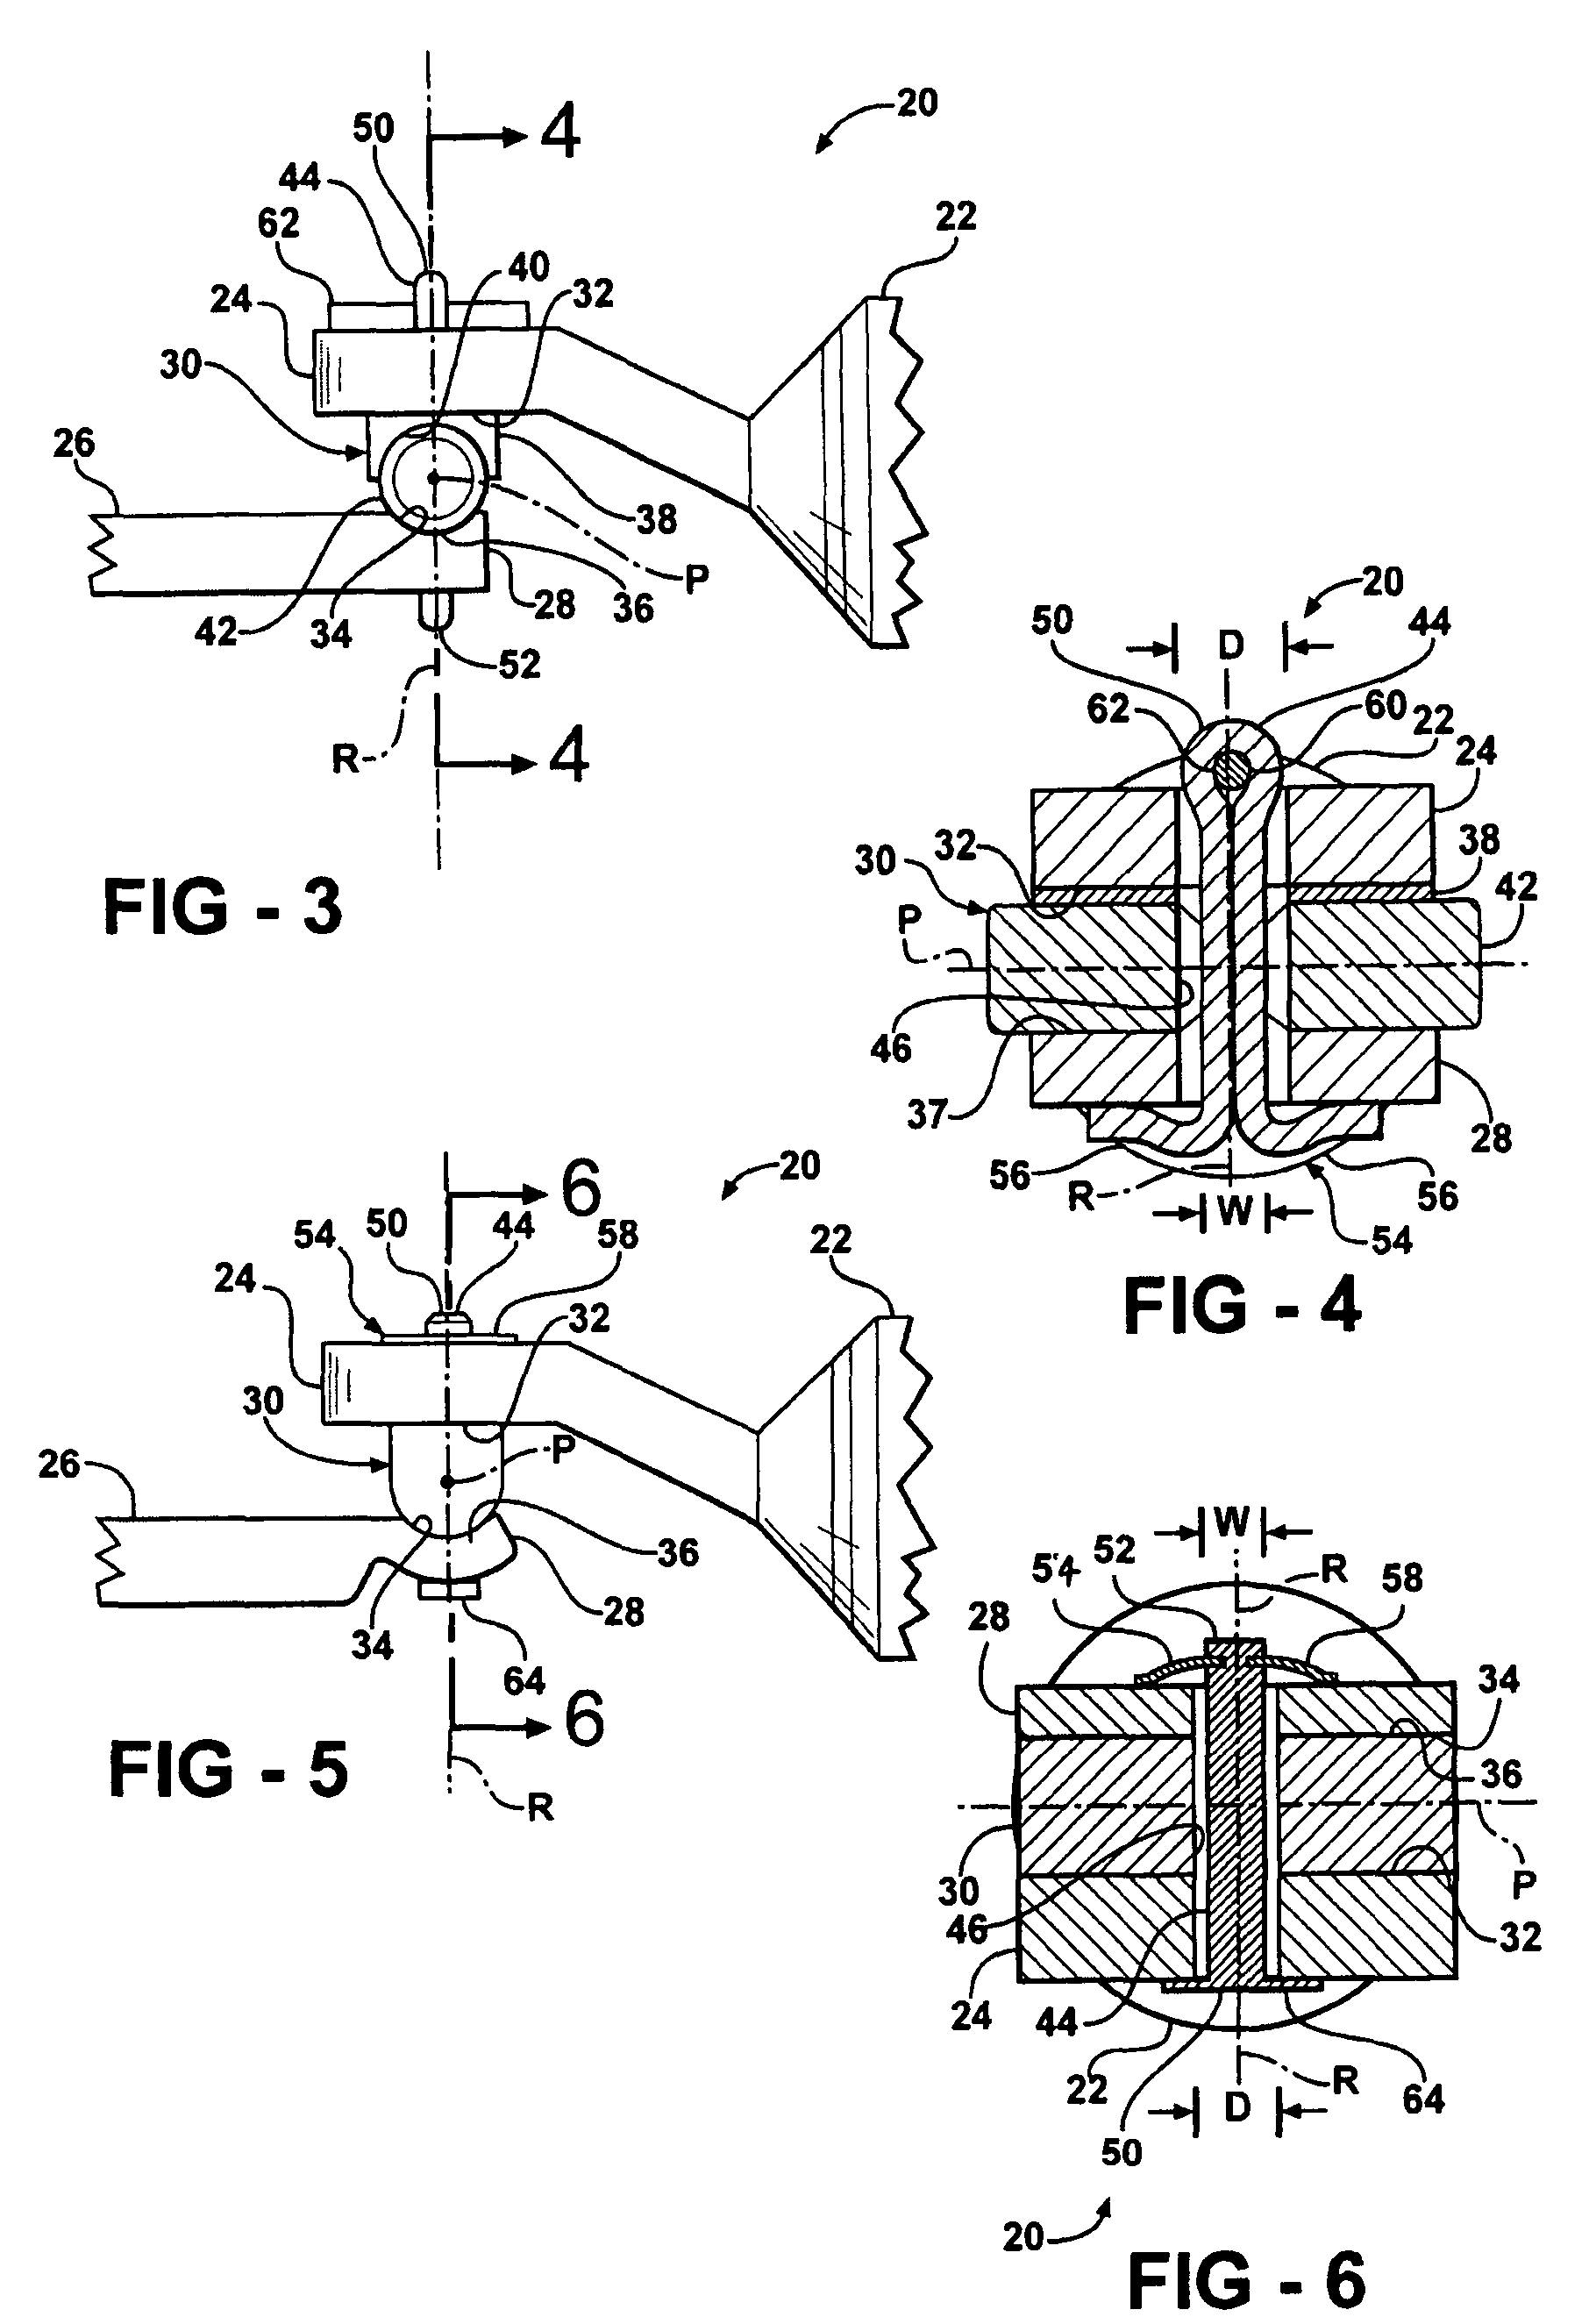 Shaft assembly with lash free bipot joint connection